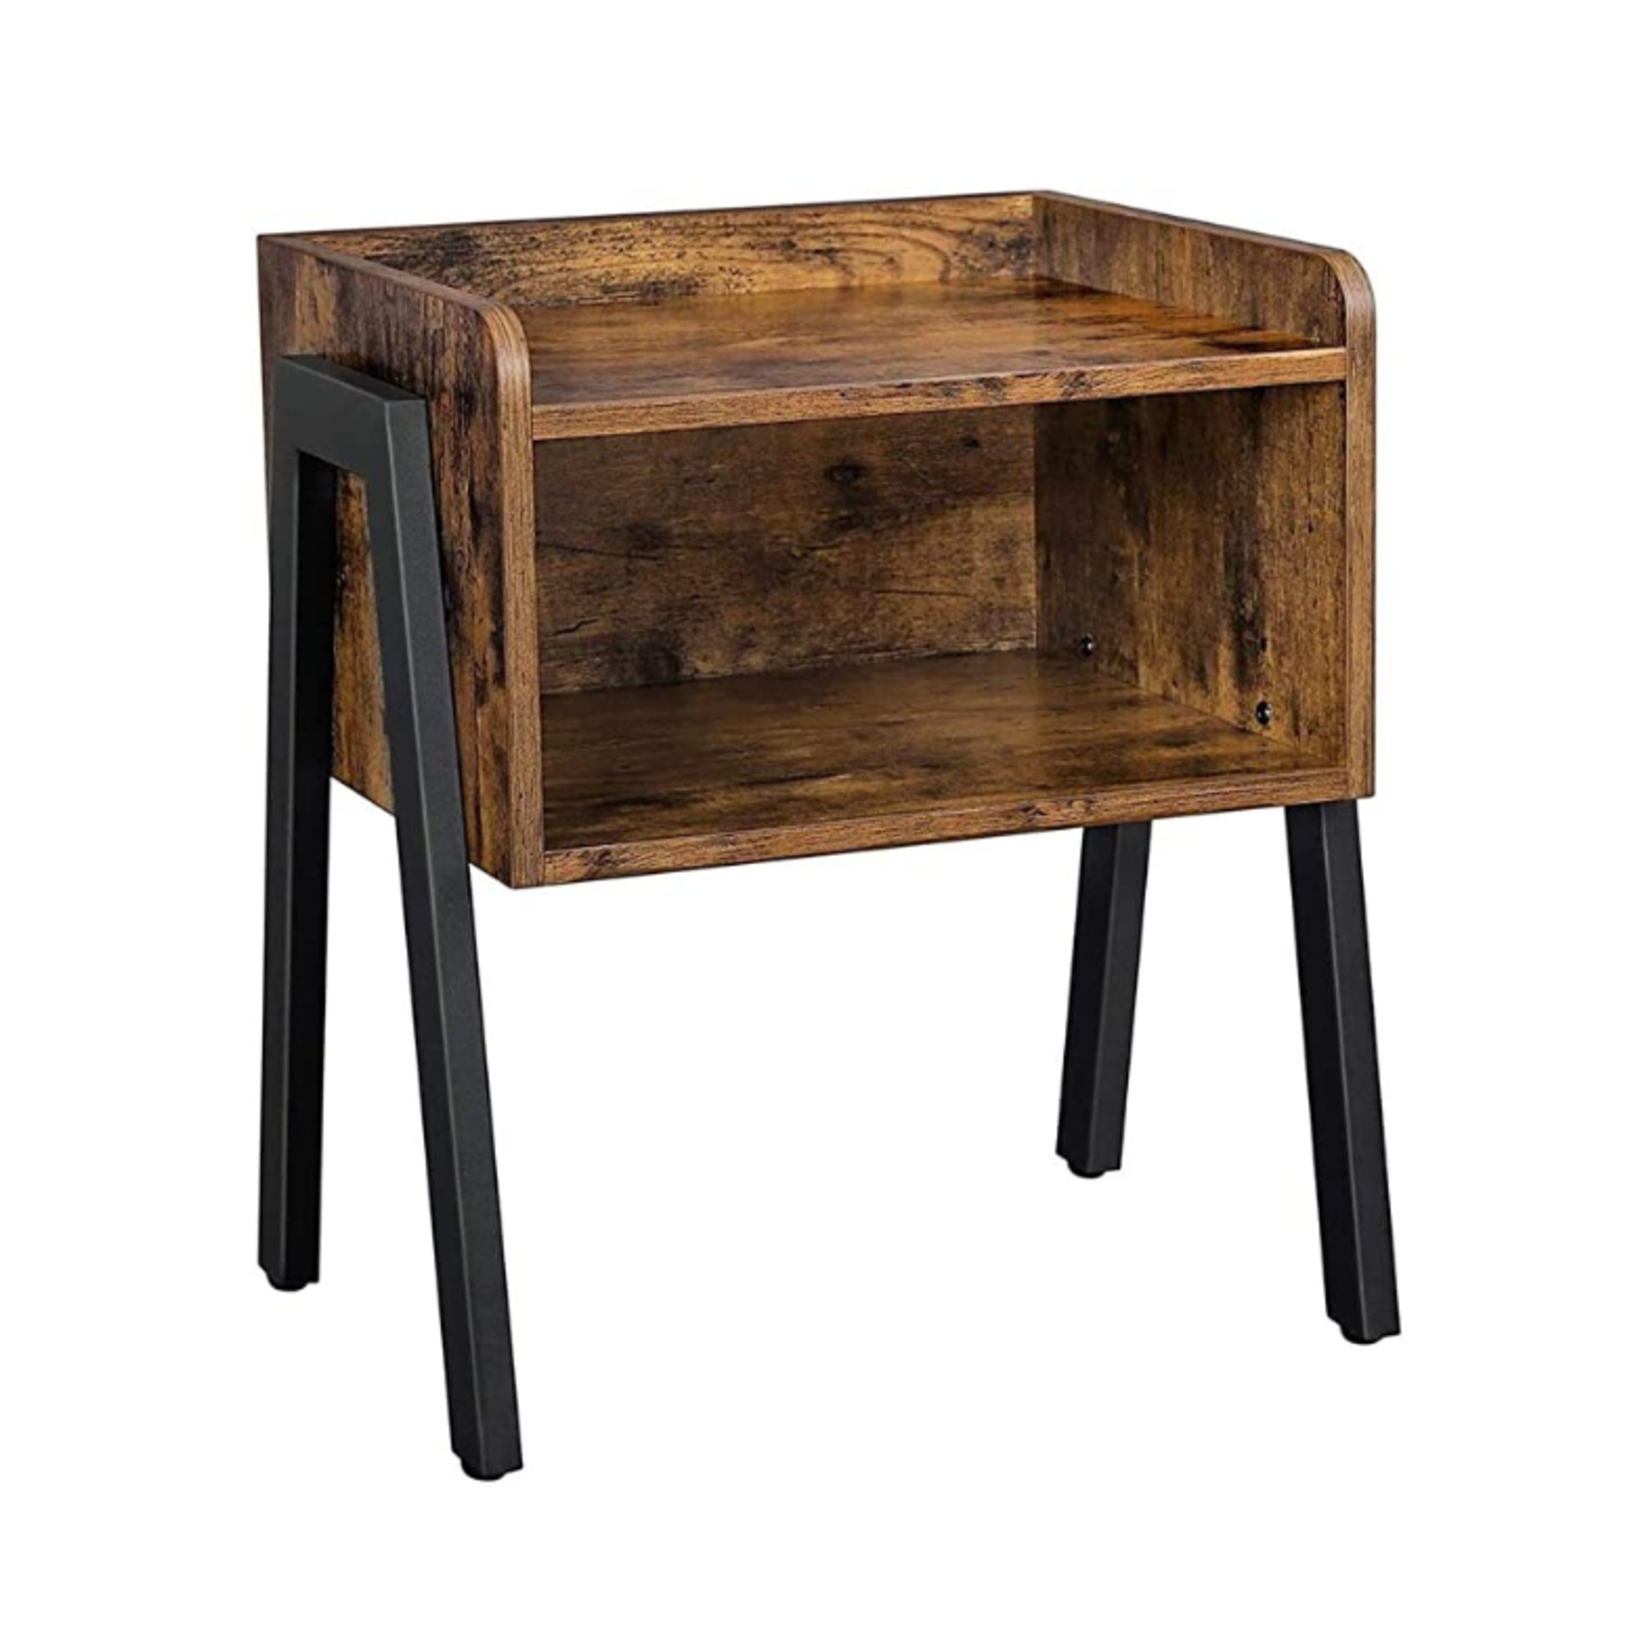 Vasagle Side Table with Storage Compartment - Rustic Brown/Black